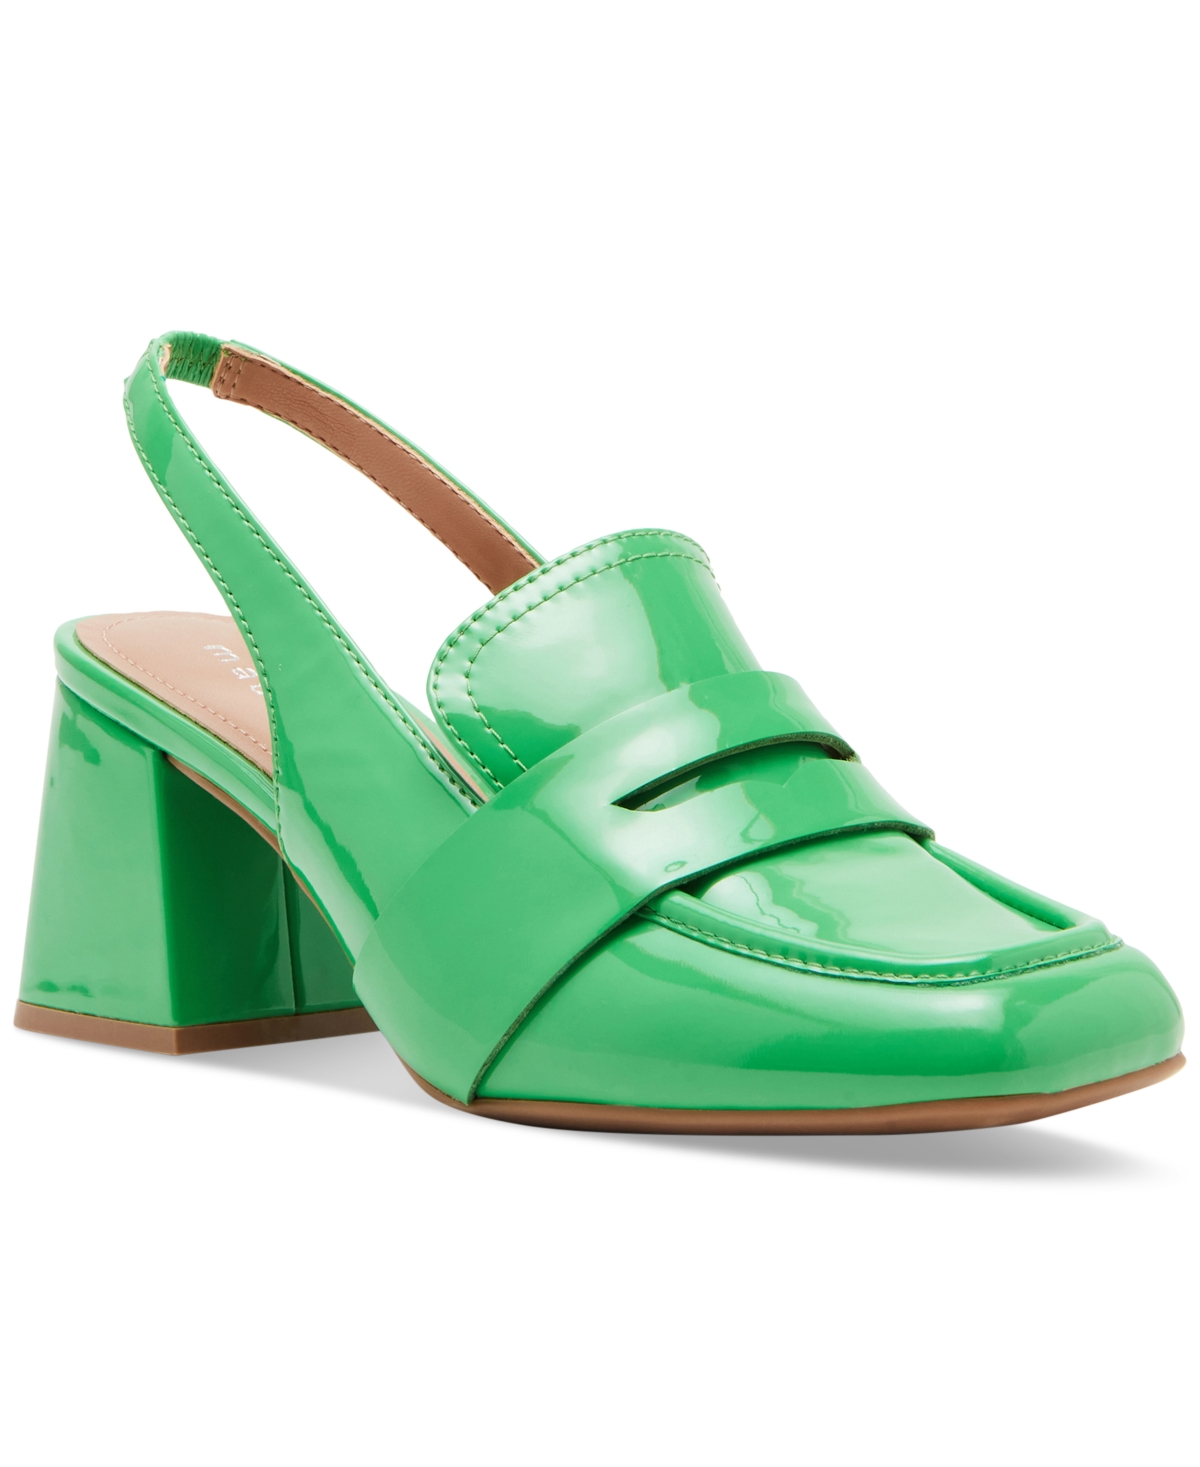 Britanna Slingback Tailored Loafer Pumps - Green Patent